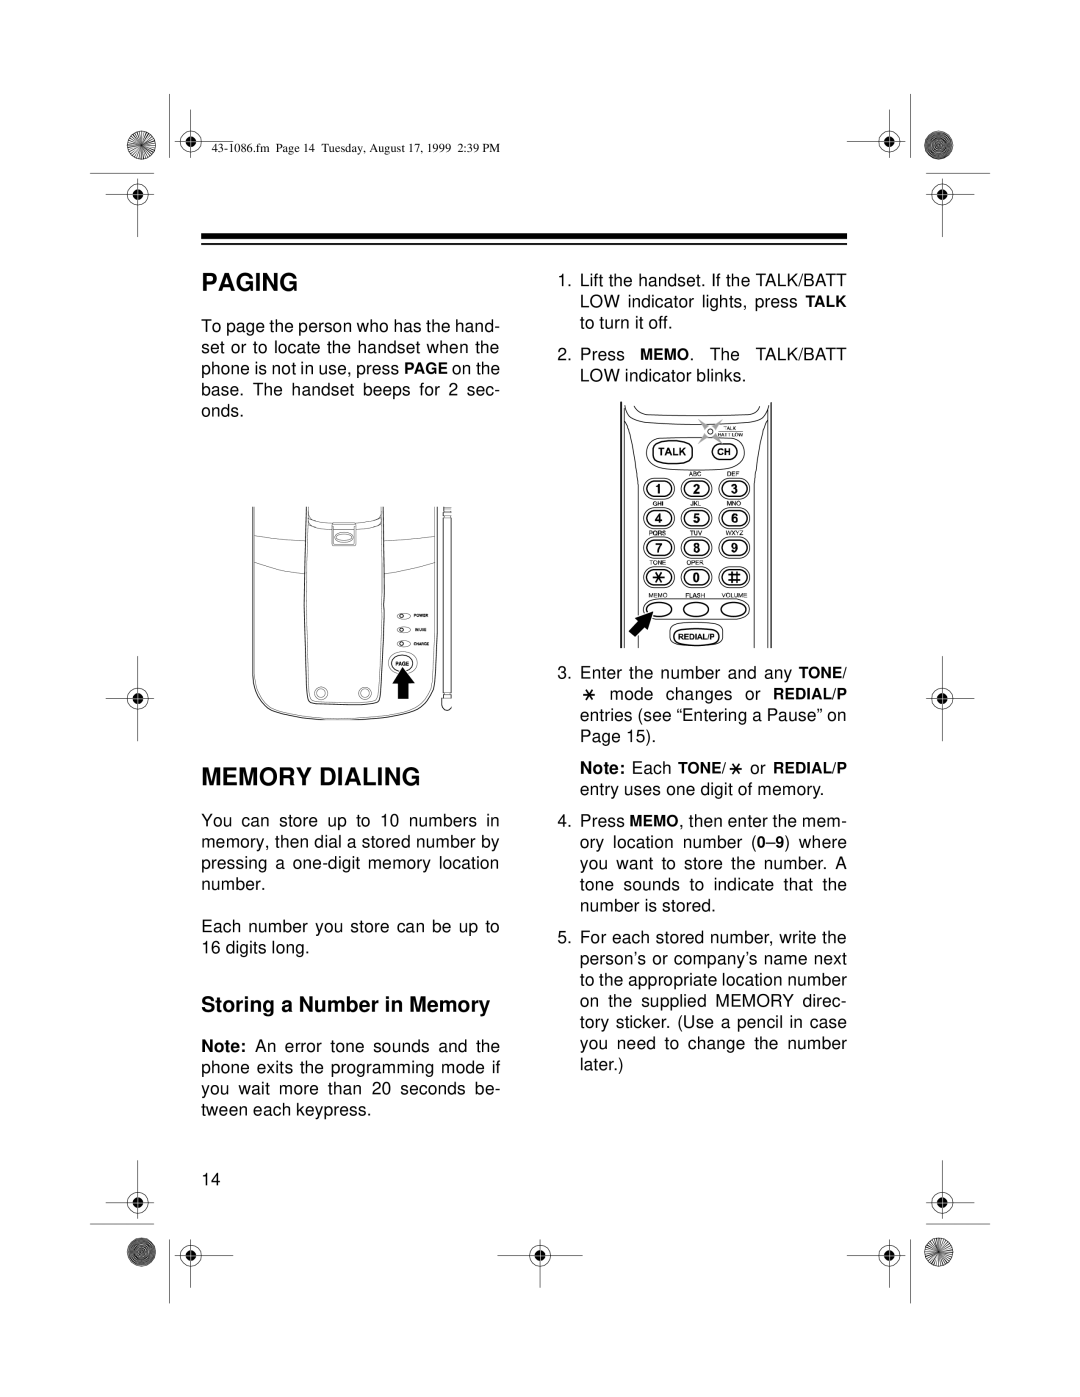 Radio Shack ET-916 owner manual Paging, Memory Dialing, Storing a Number in Memory 